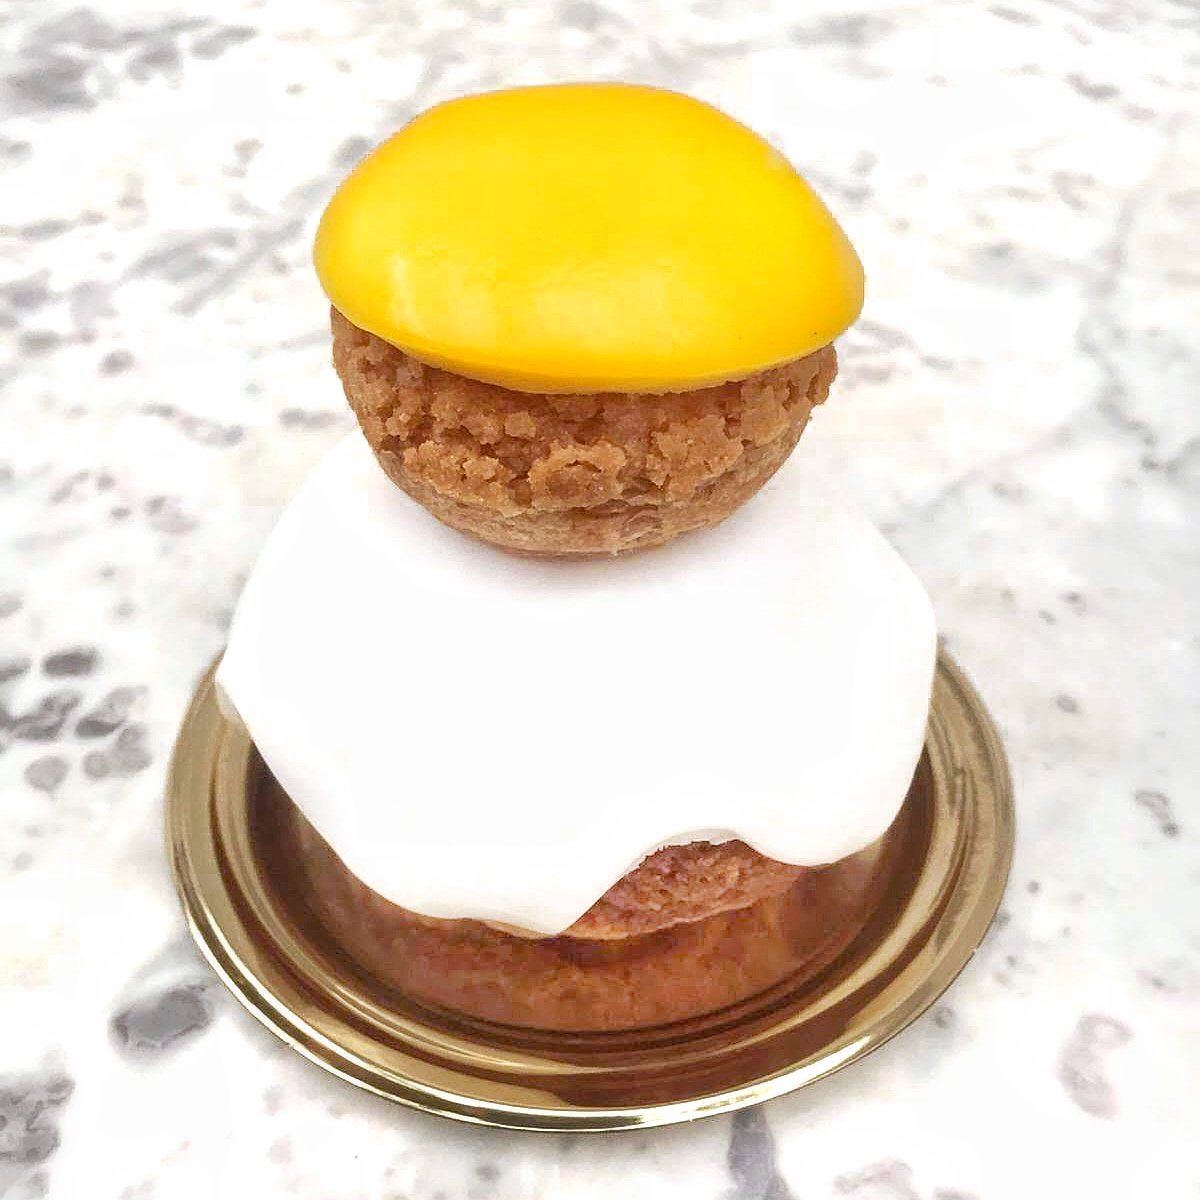 Introducing our Sunny Side Up Religieuse, just in time for Easter, filled with creamy milk chocolate crémeux and passionfruit caramel. Available here at #DABLondon from 19th to 21st April (preorders are up online at DominiqueAnselLondon.com too). #DABEaster #HappyEaster